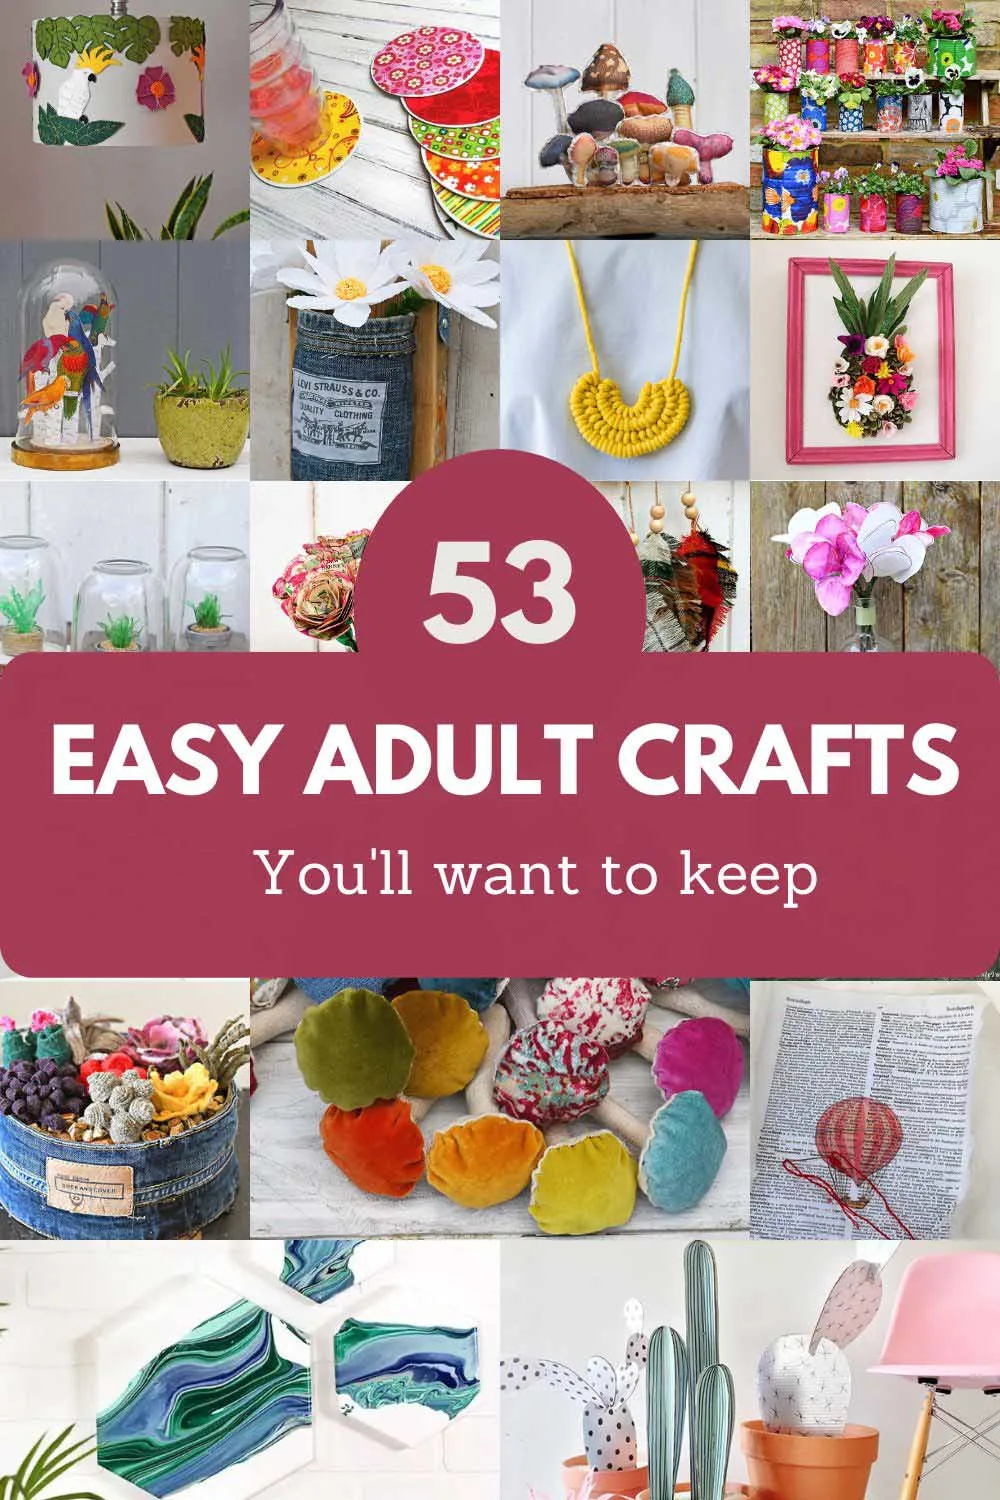 Adult Craft Ideas: lots of crafts for adults  Diy crafts for adults, Crafts,  Adult crafts